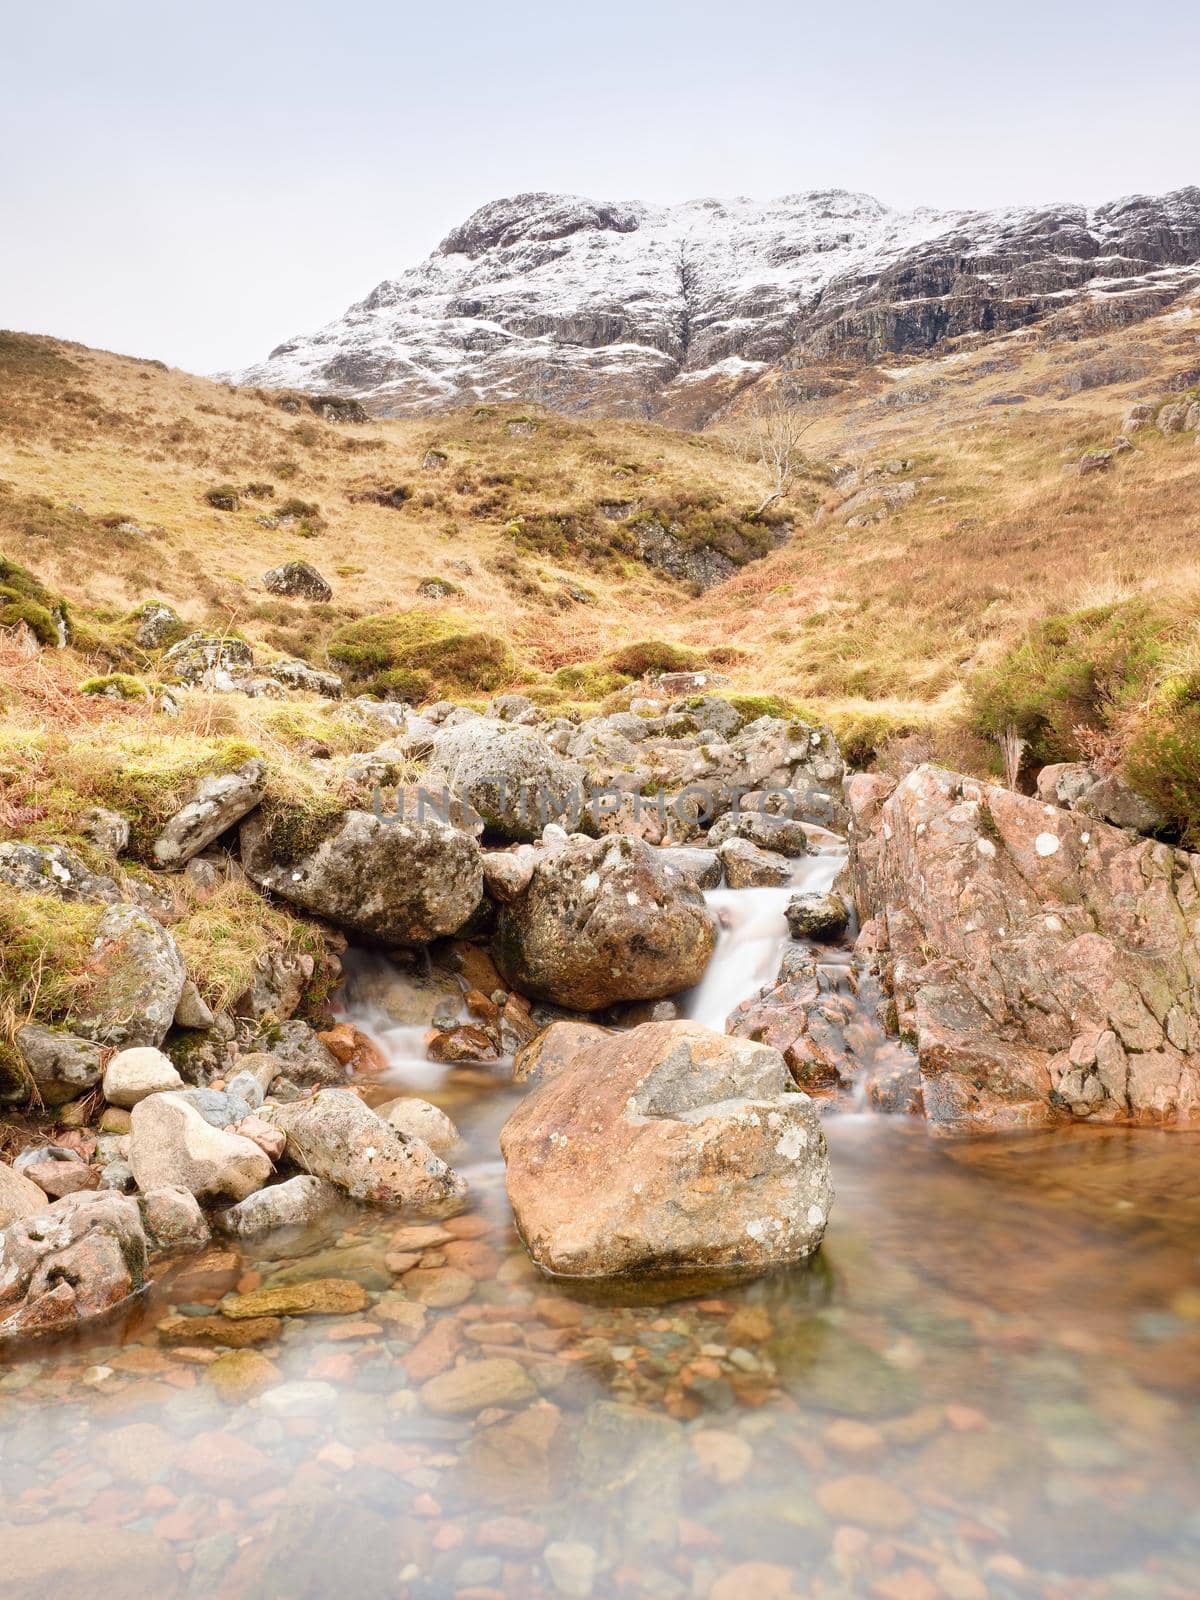 Rapids in small waterfall on stream, Higland in Scotland an early spring day. Snowy cone of mountain in clouds. Dry grass and heather bushes on banks